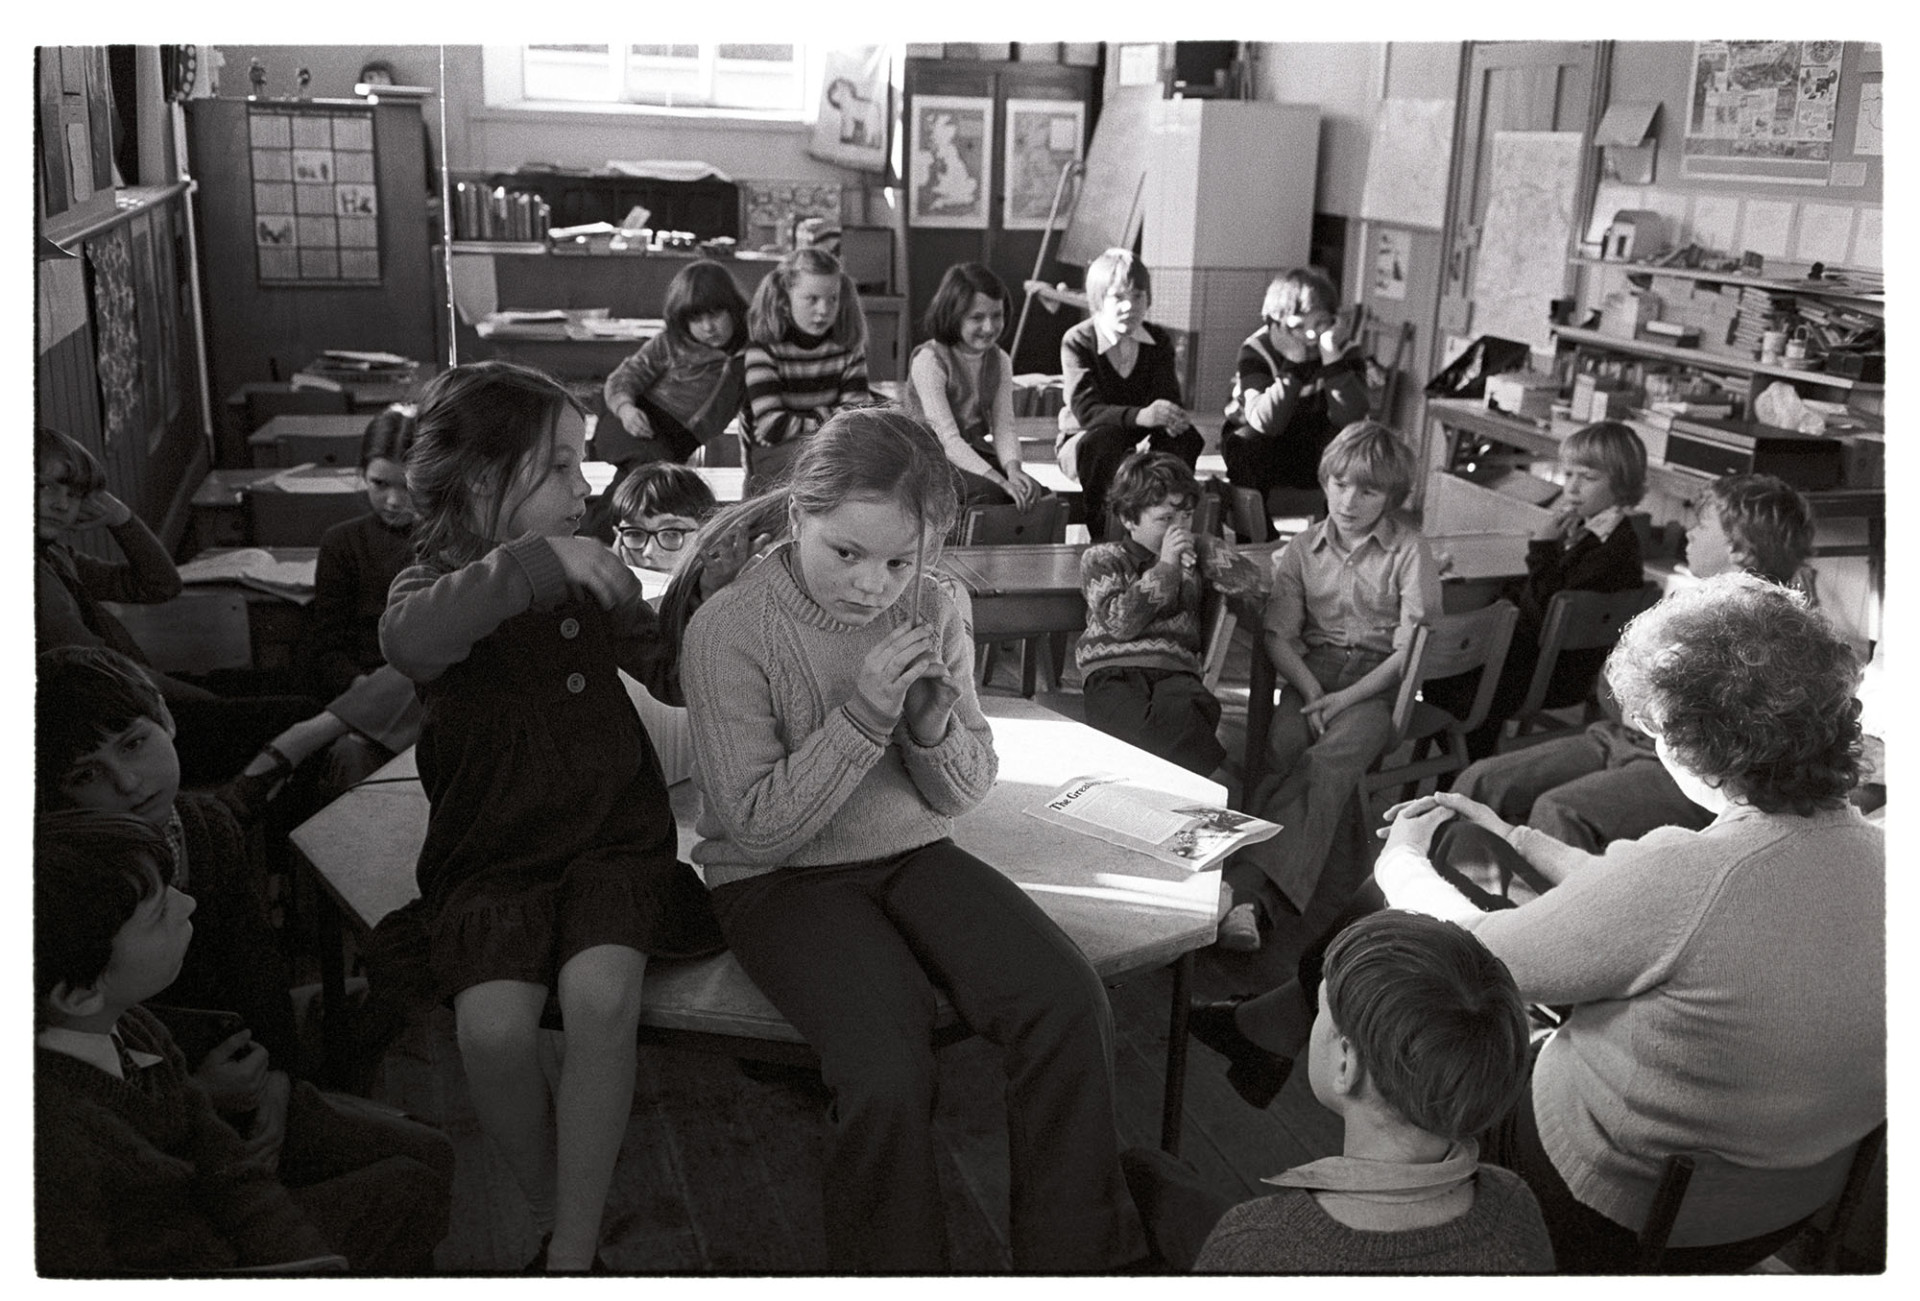 Primary school classroom with children listening to radio, girl doing friends hair!
[Schoolchildren at Burrington Primary School listening to a radio broadcast in a classroom. One girl is sat on a table and styling her friends hair.]